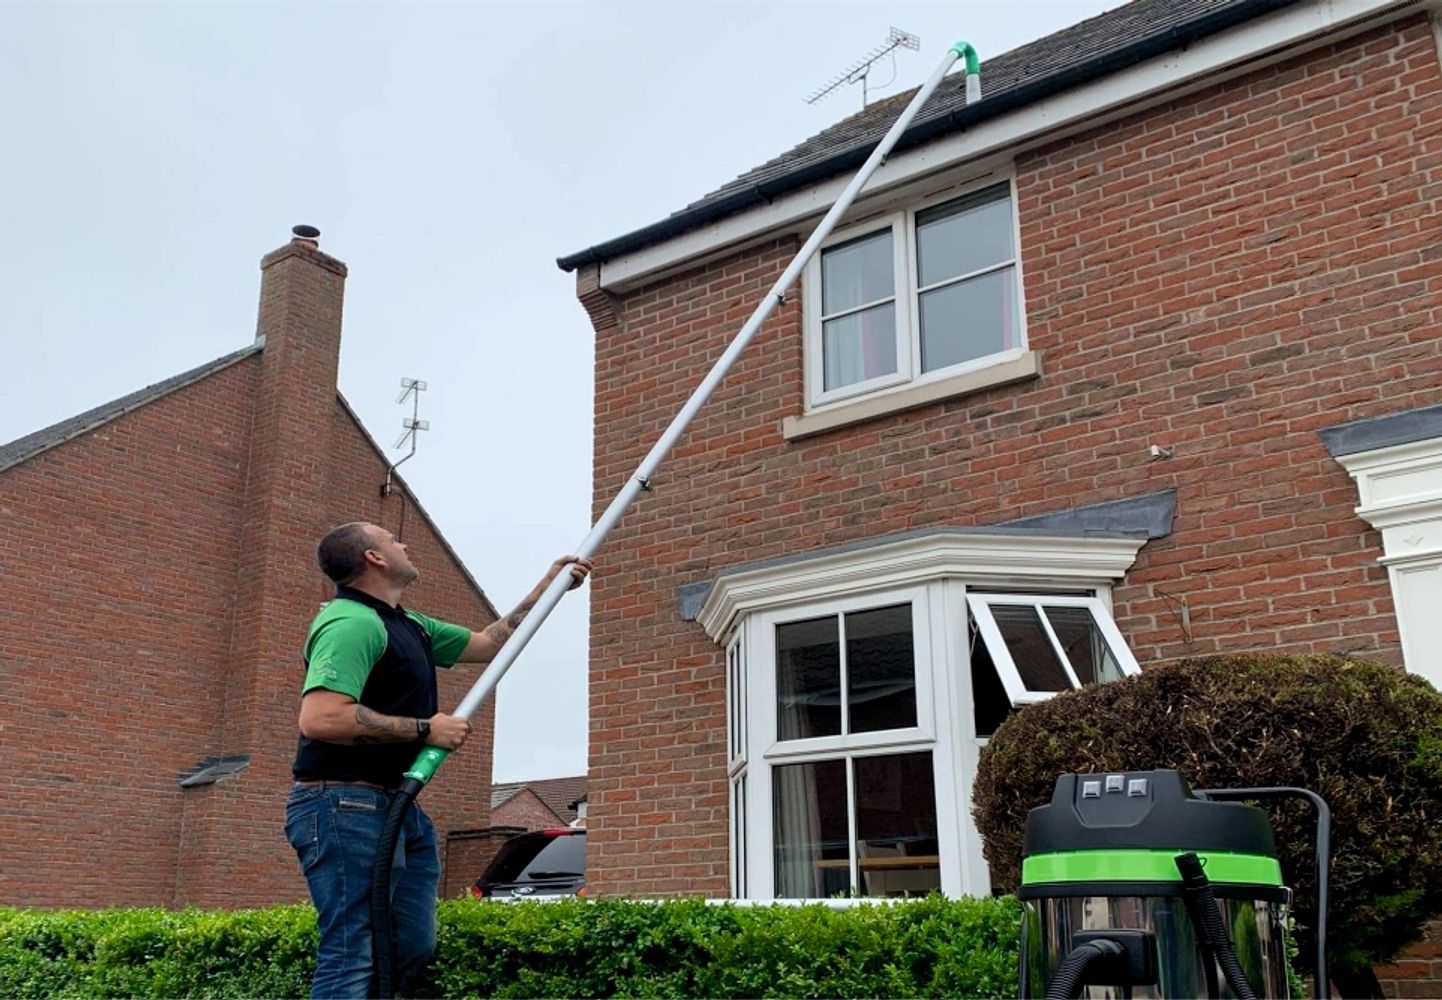 Gutters being cleaned 4 less with a gutter vacuum & leaks sealed for FREE with ladders.